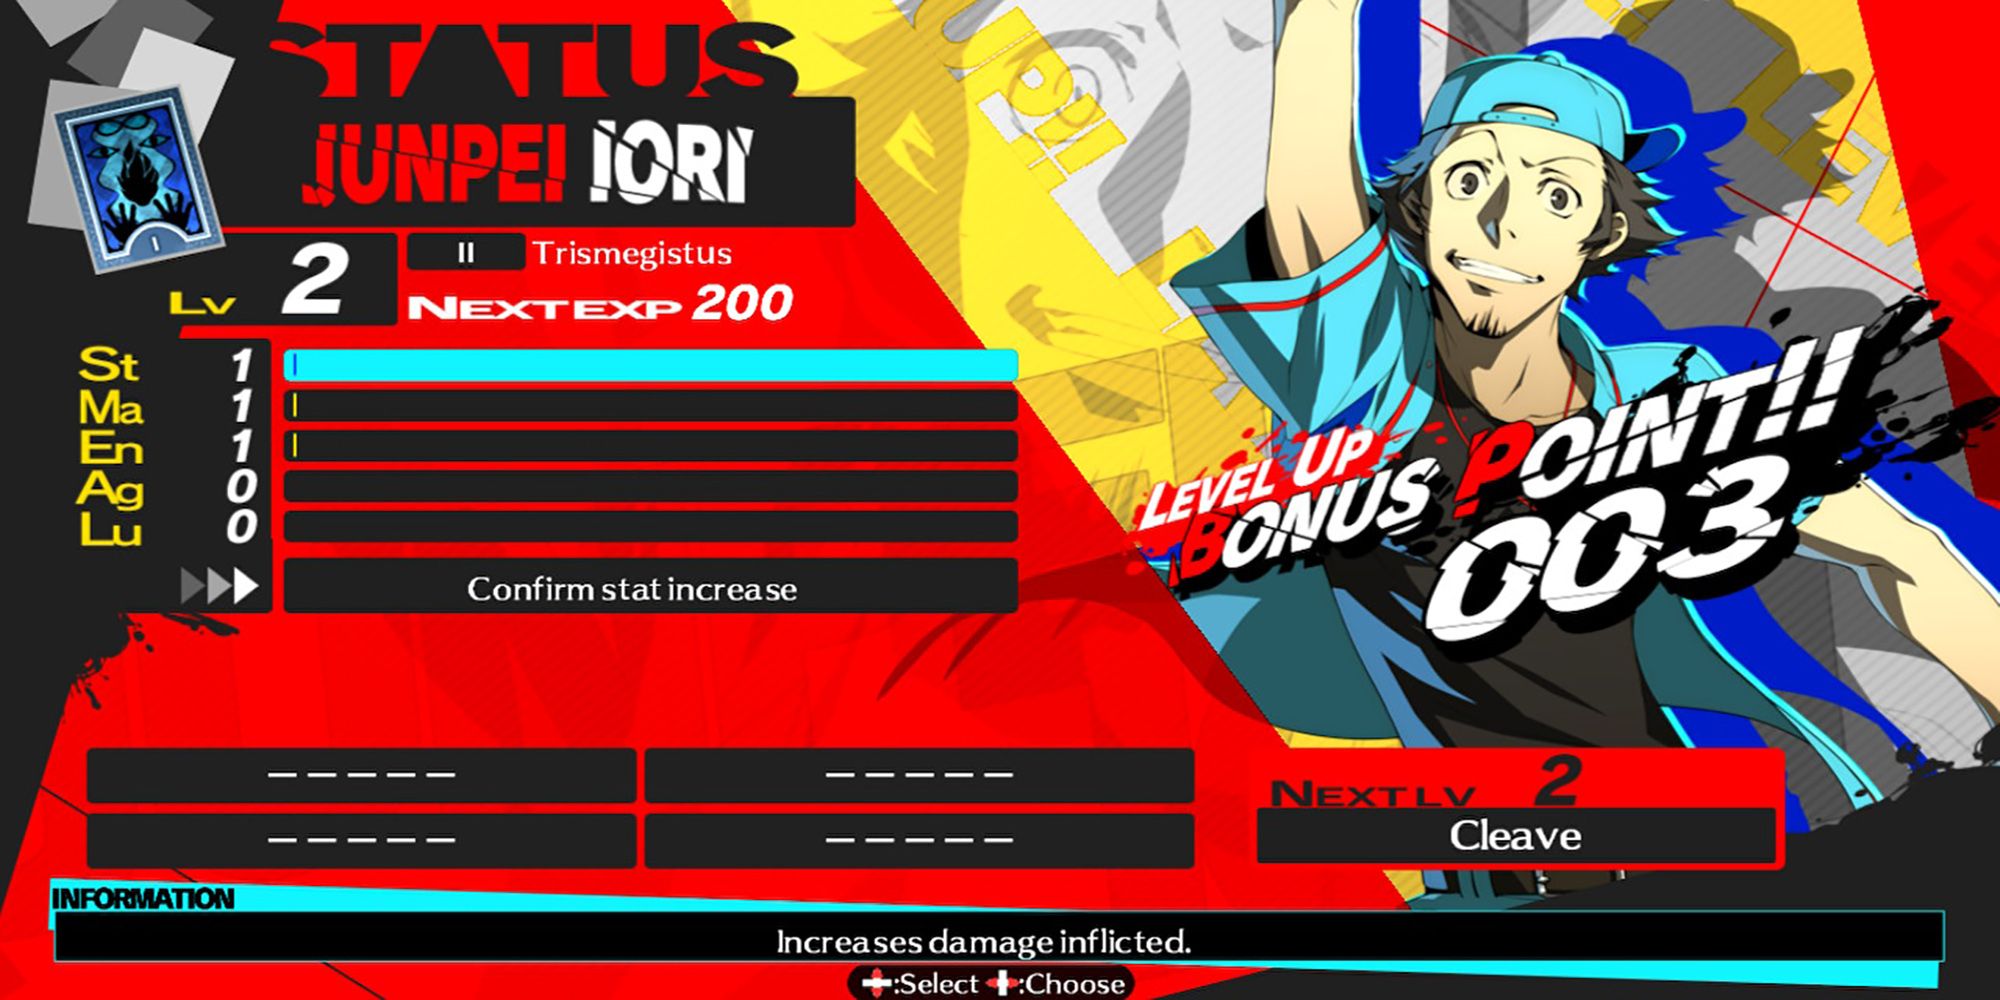 Junpei receives three bonus points to add to his stats in Golden Arena Mode. Persona 4 Arena Ultimax.